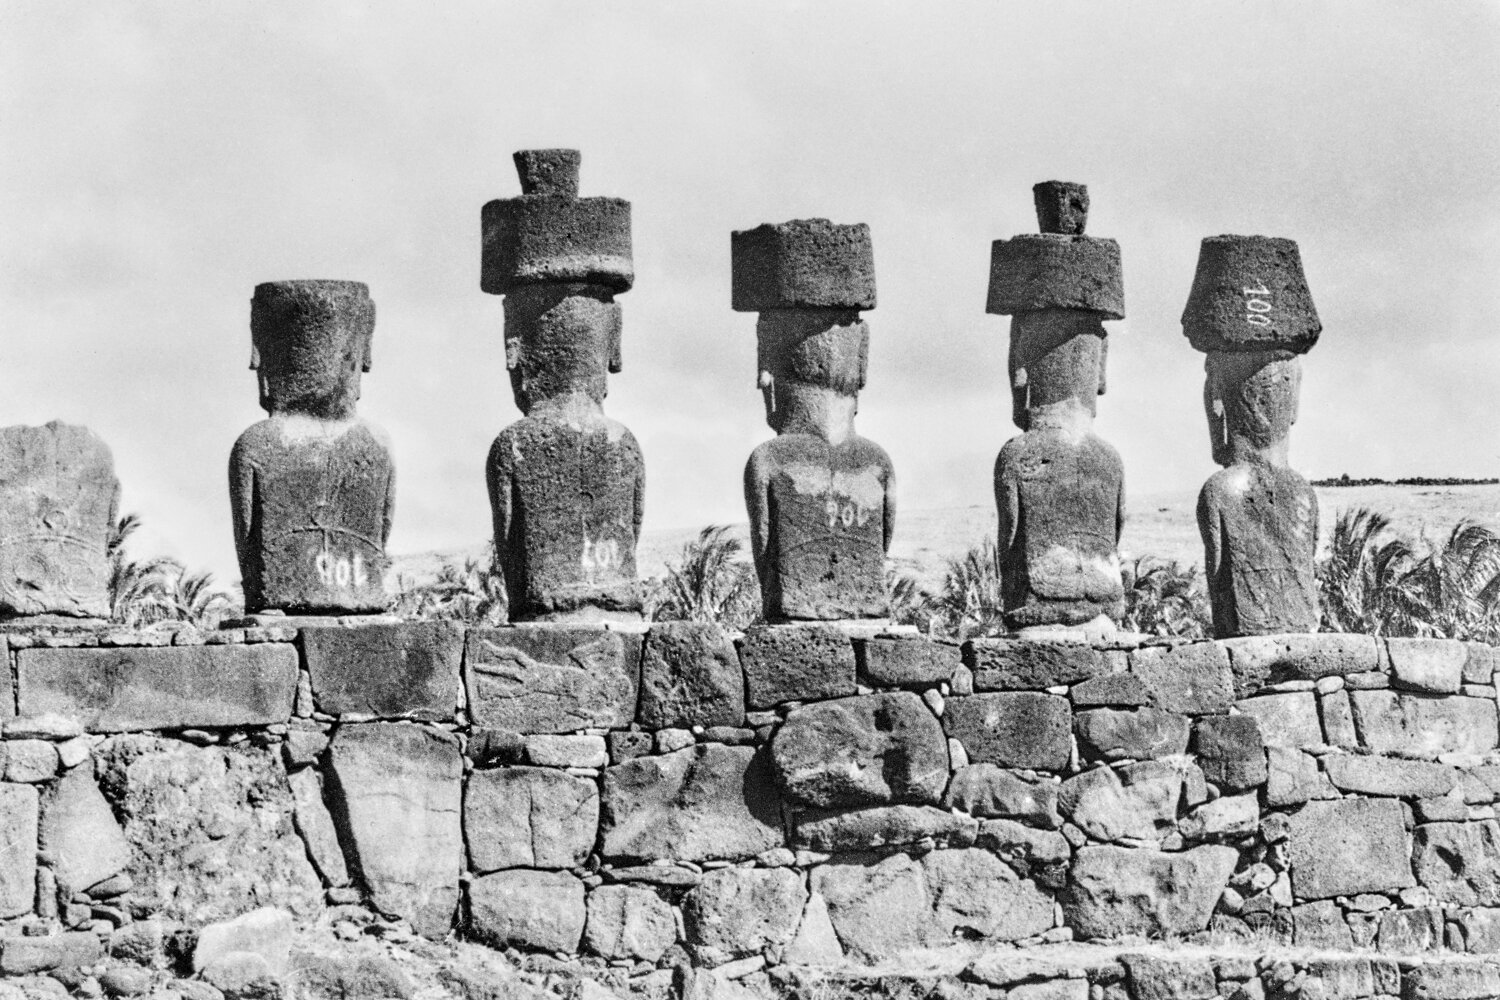  Archive , Easter Island - 1980   	  